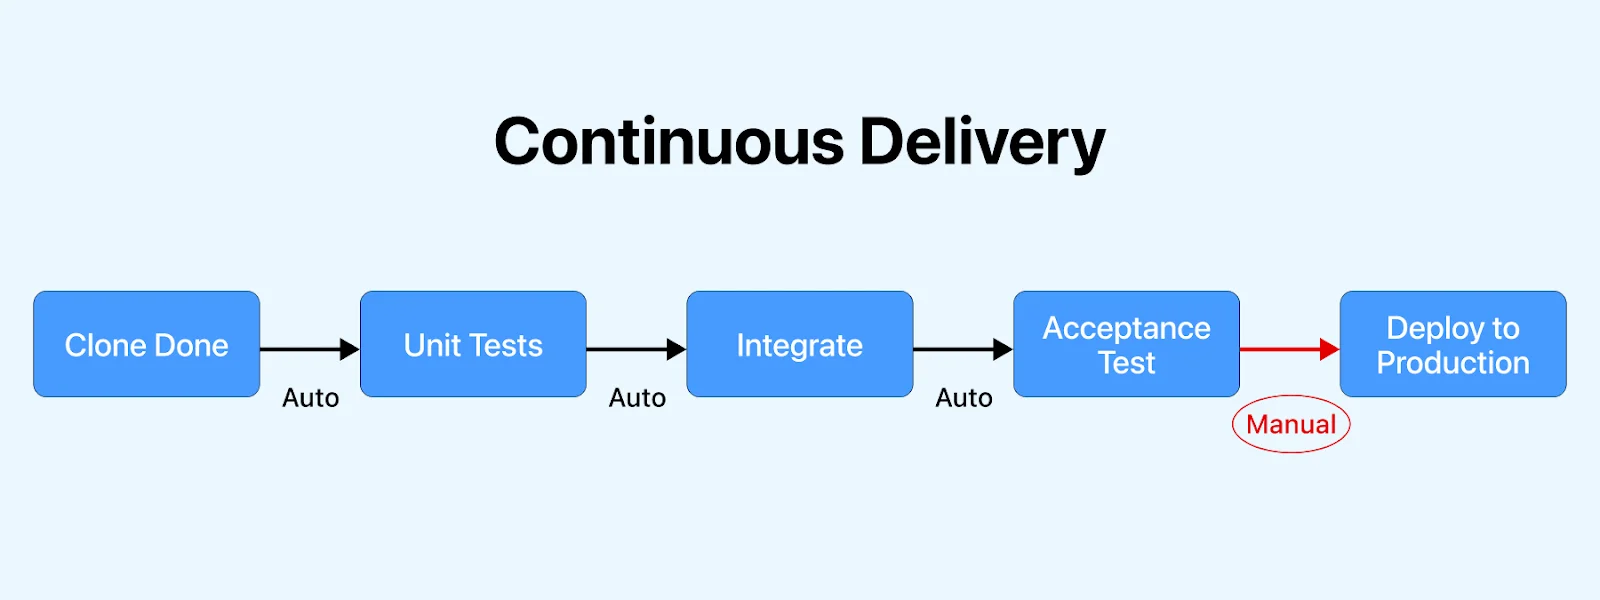 Continuous Deployment/Continuous Delivery (CD)